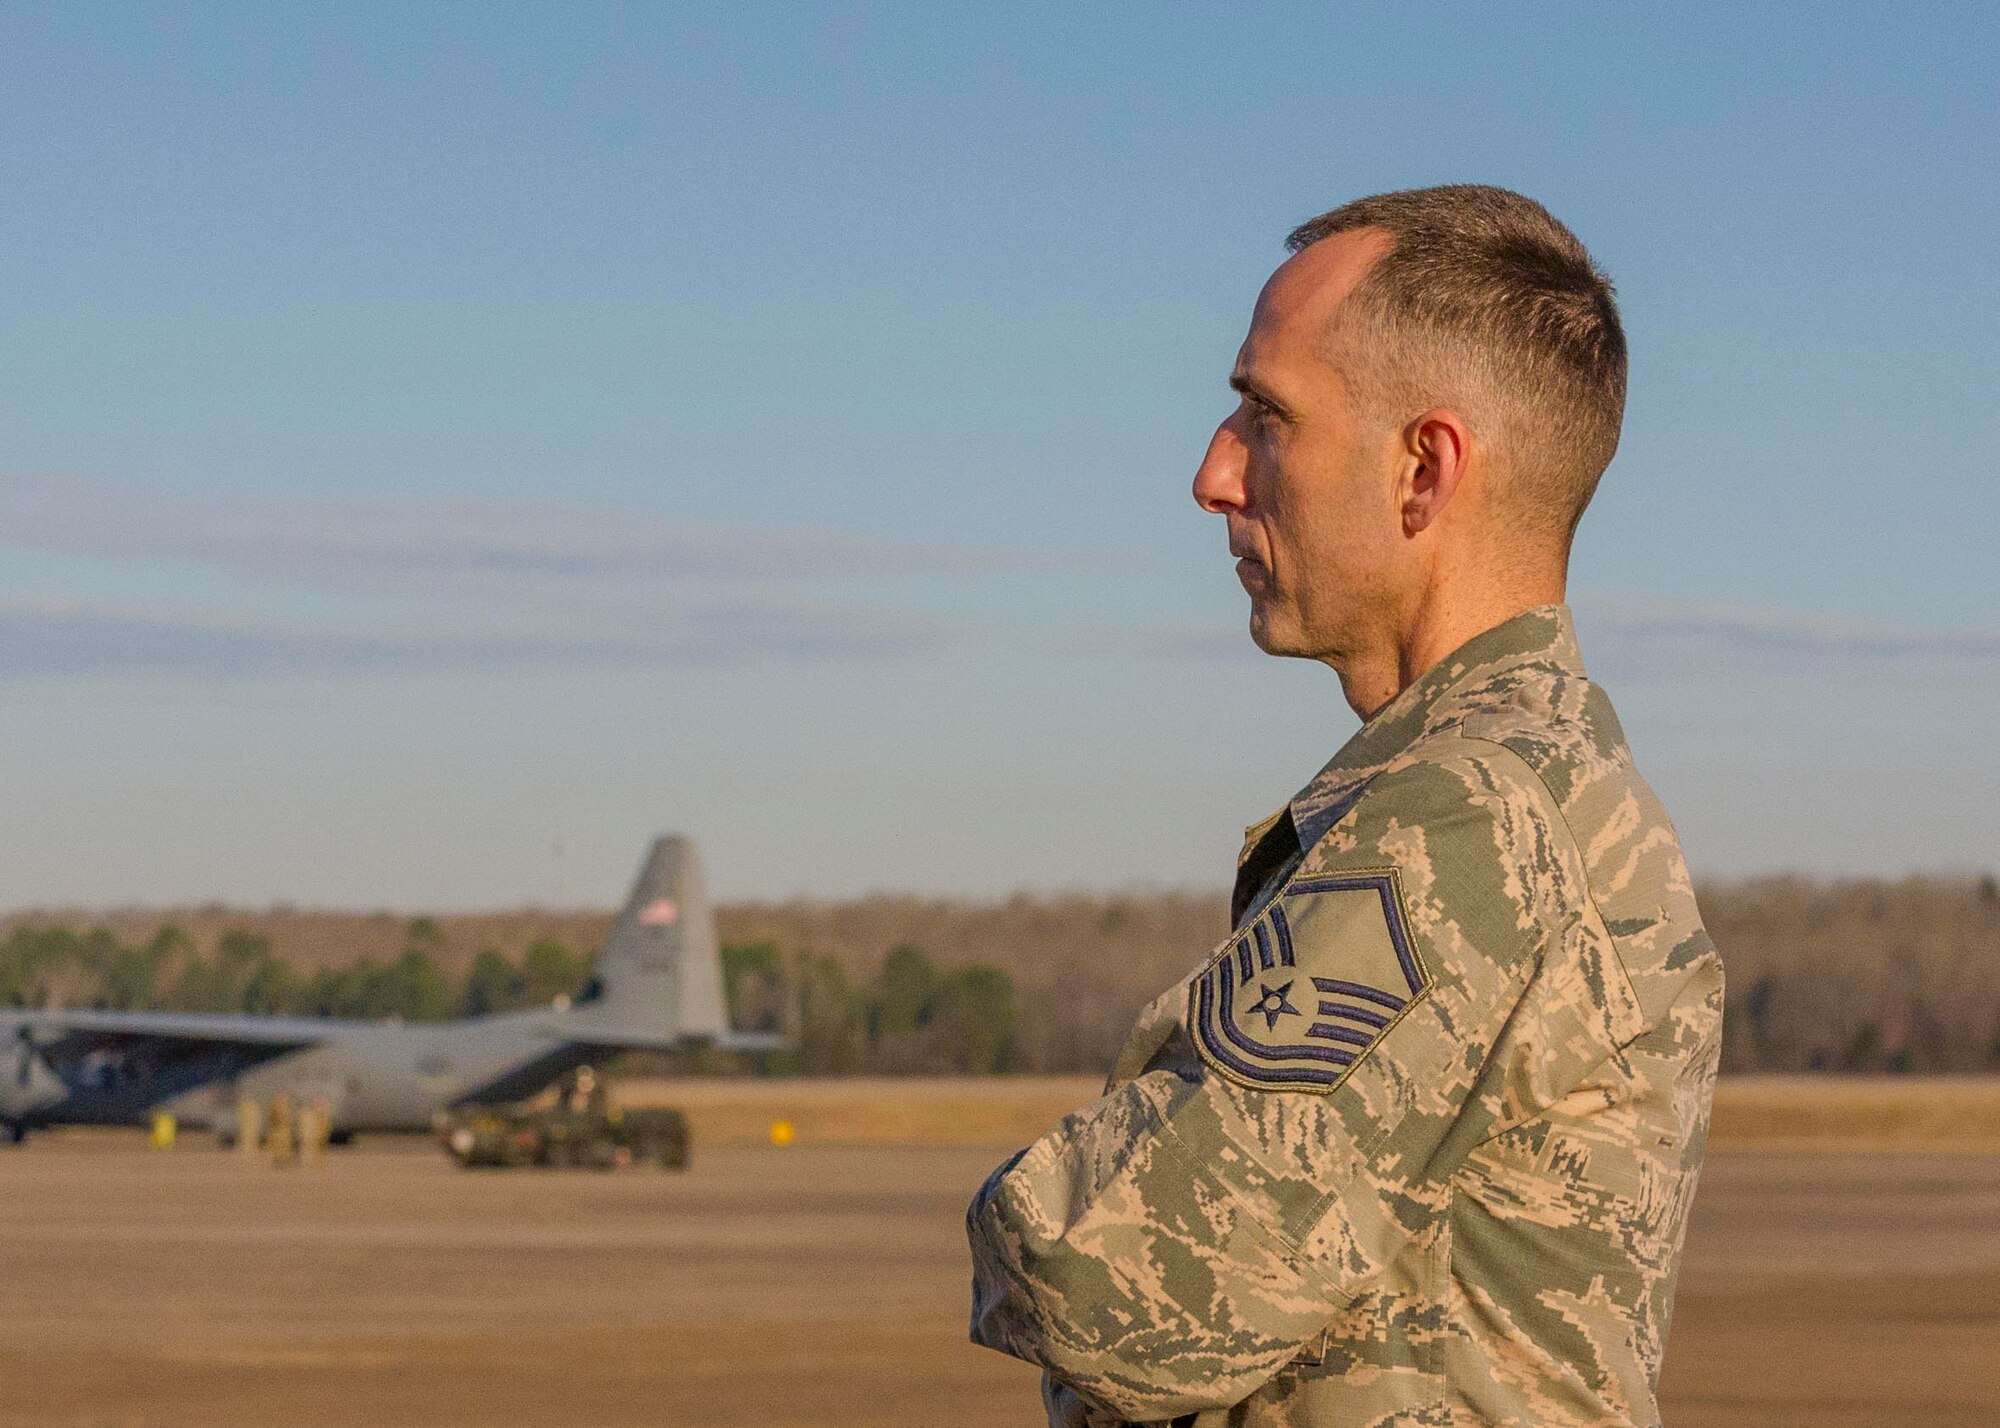 Master Sgt. Matthew Sheley poses on the flight line with C-130J aircraft in the background.